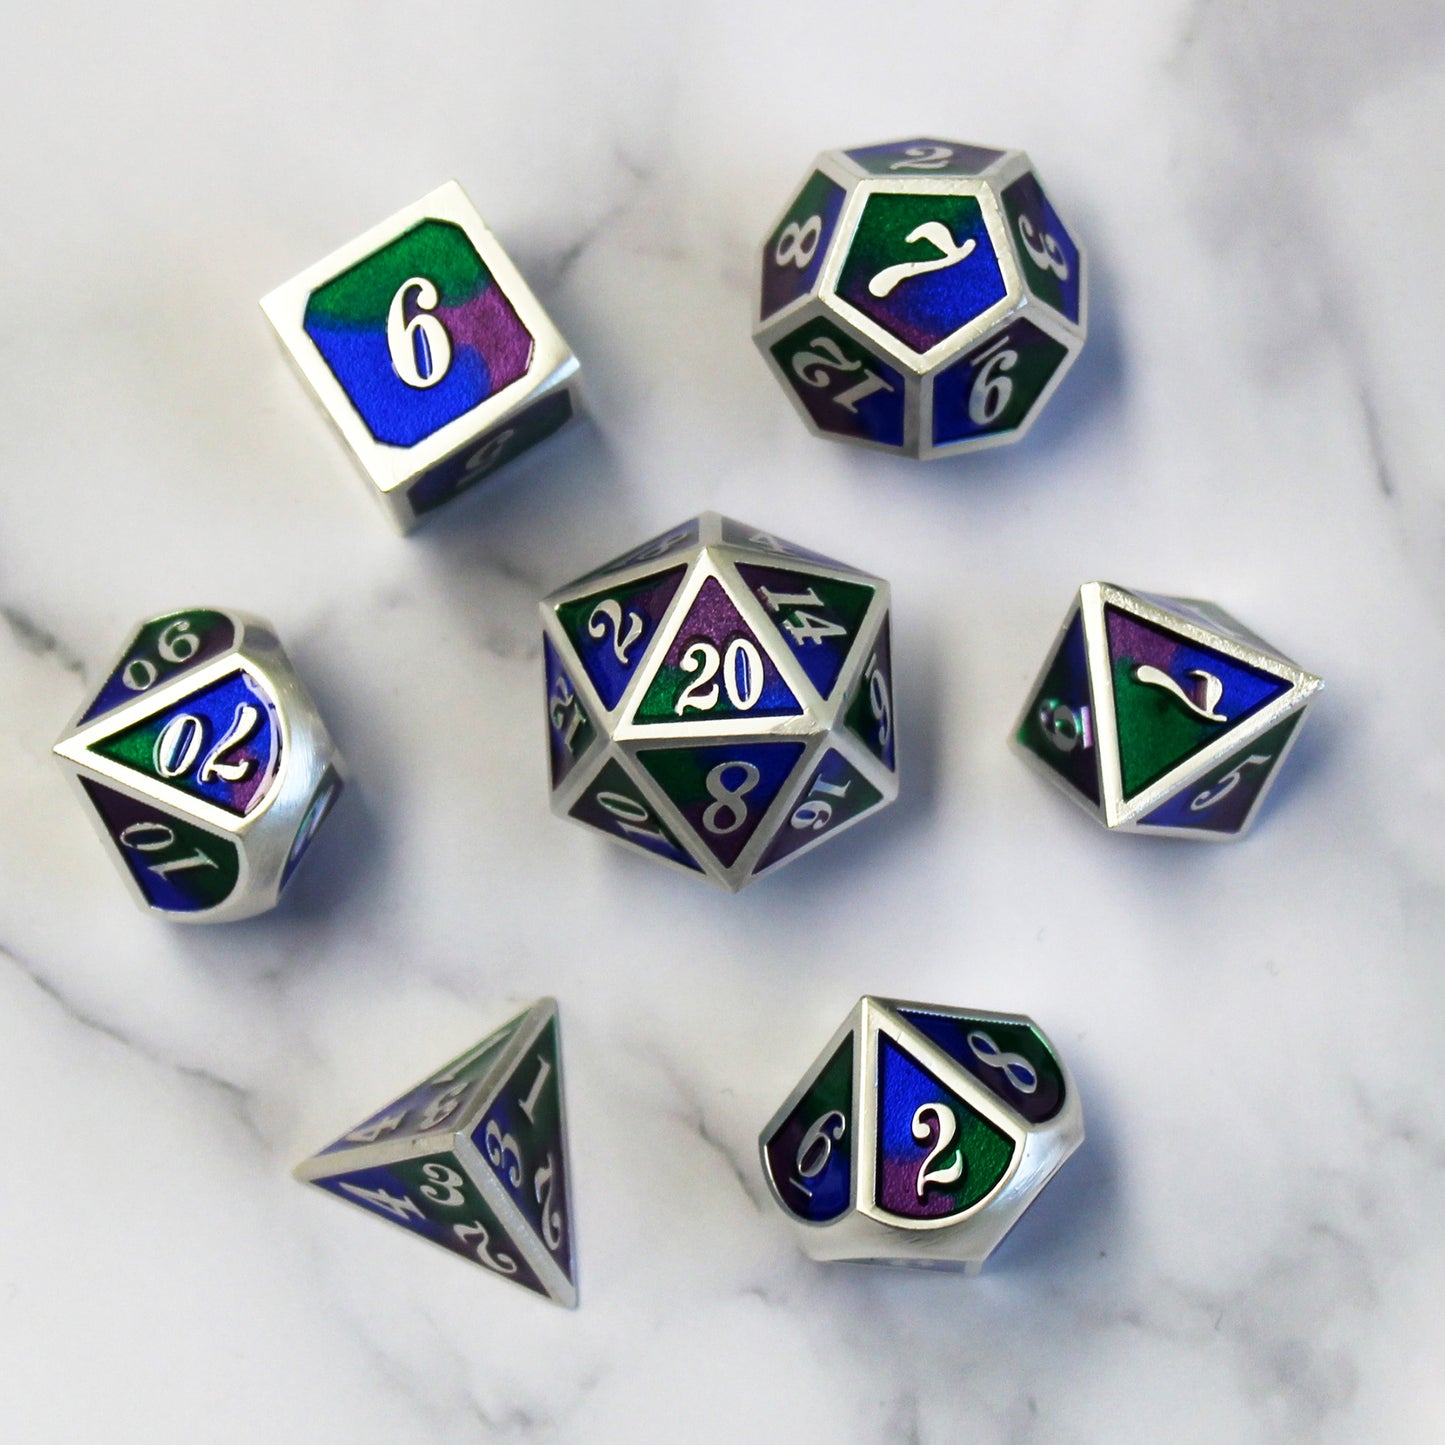 Metal Imperial Twilight Dice Set with Display Box